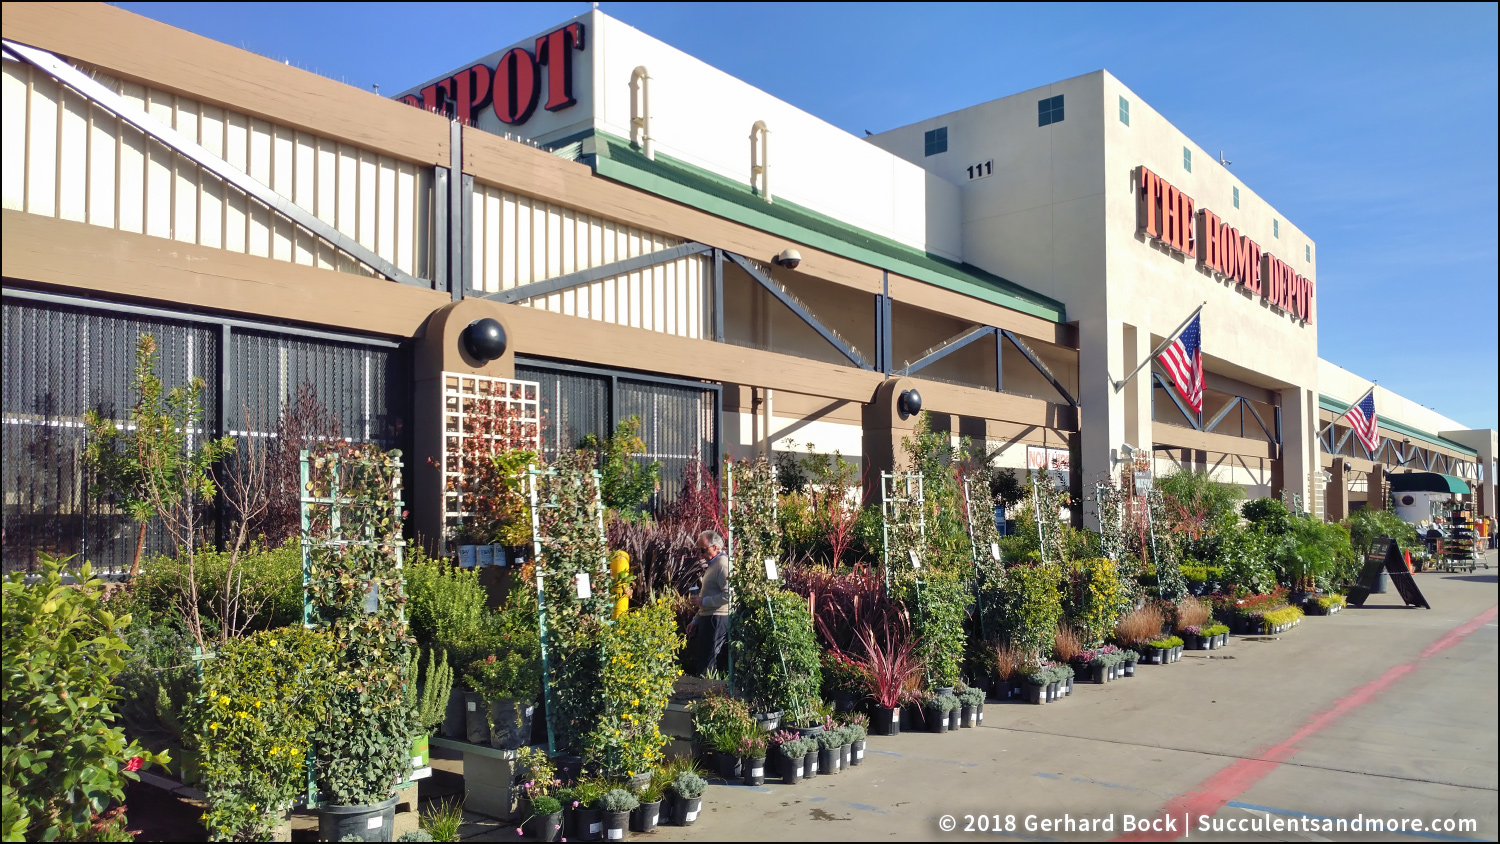 I discovered a great nursery—and it's a Home Depot!